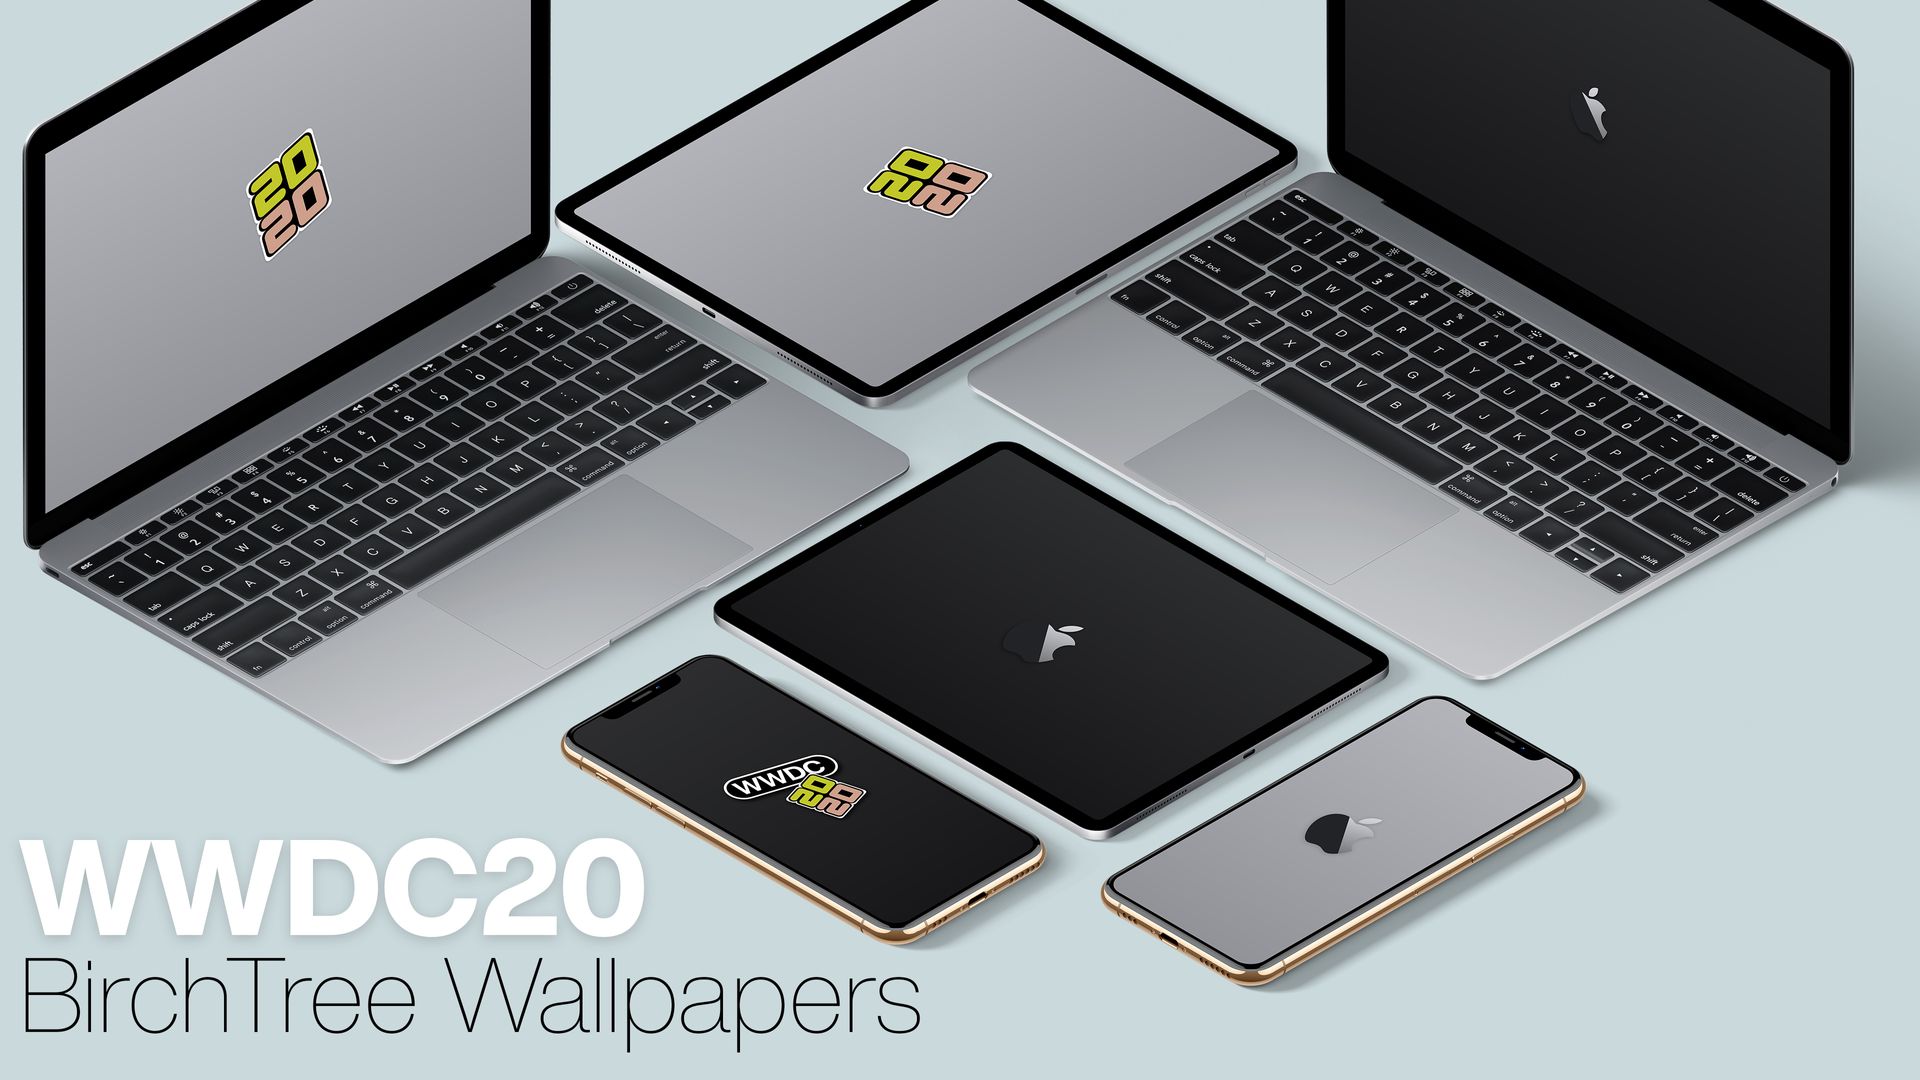 Prepare For Wwdc With These Apple Inspired Wallpapers For Iphone Ipad And Mac 9to5mac